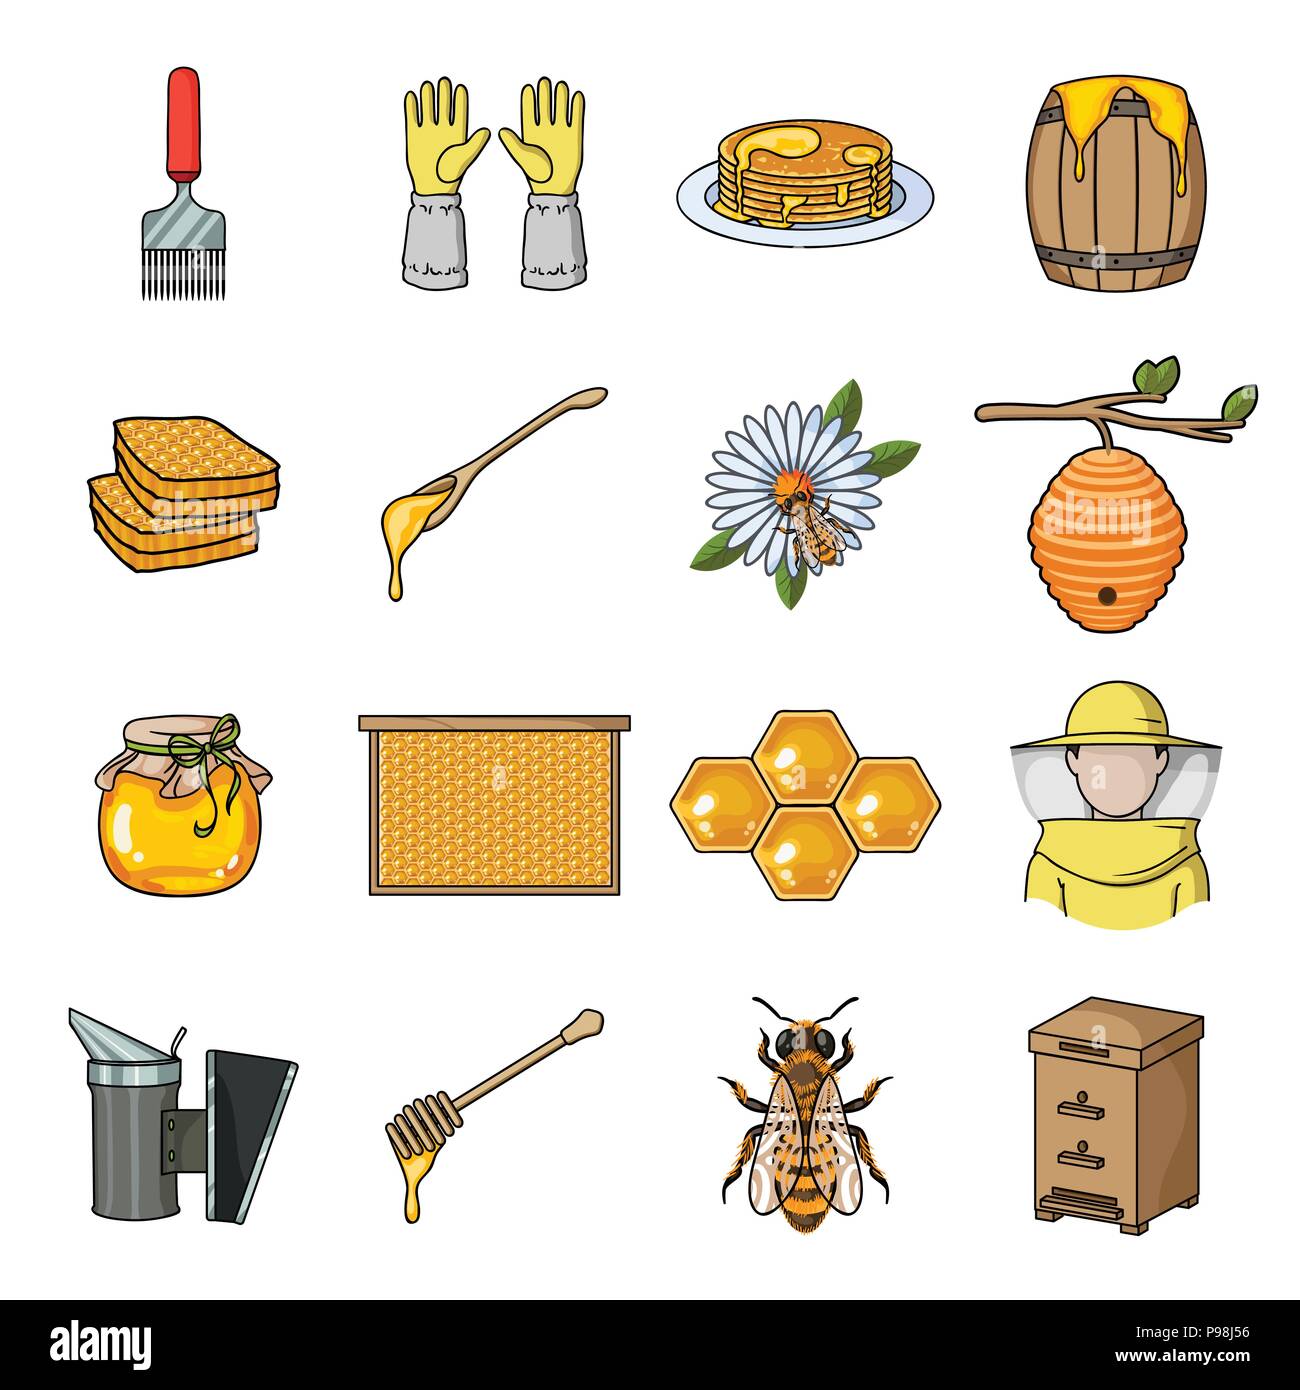 Beekeeper Vector Art, Icons, and Graphics for Free Download